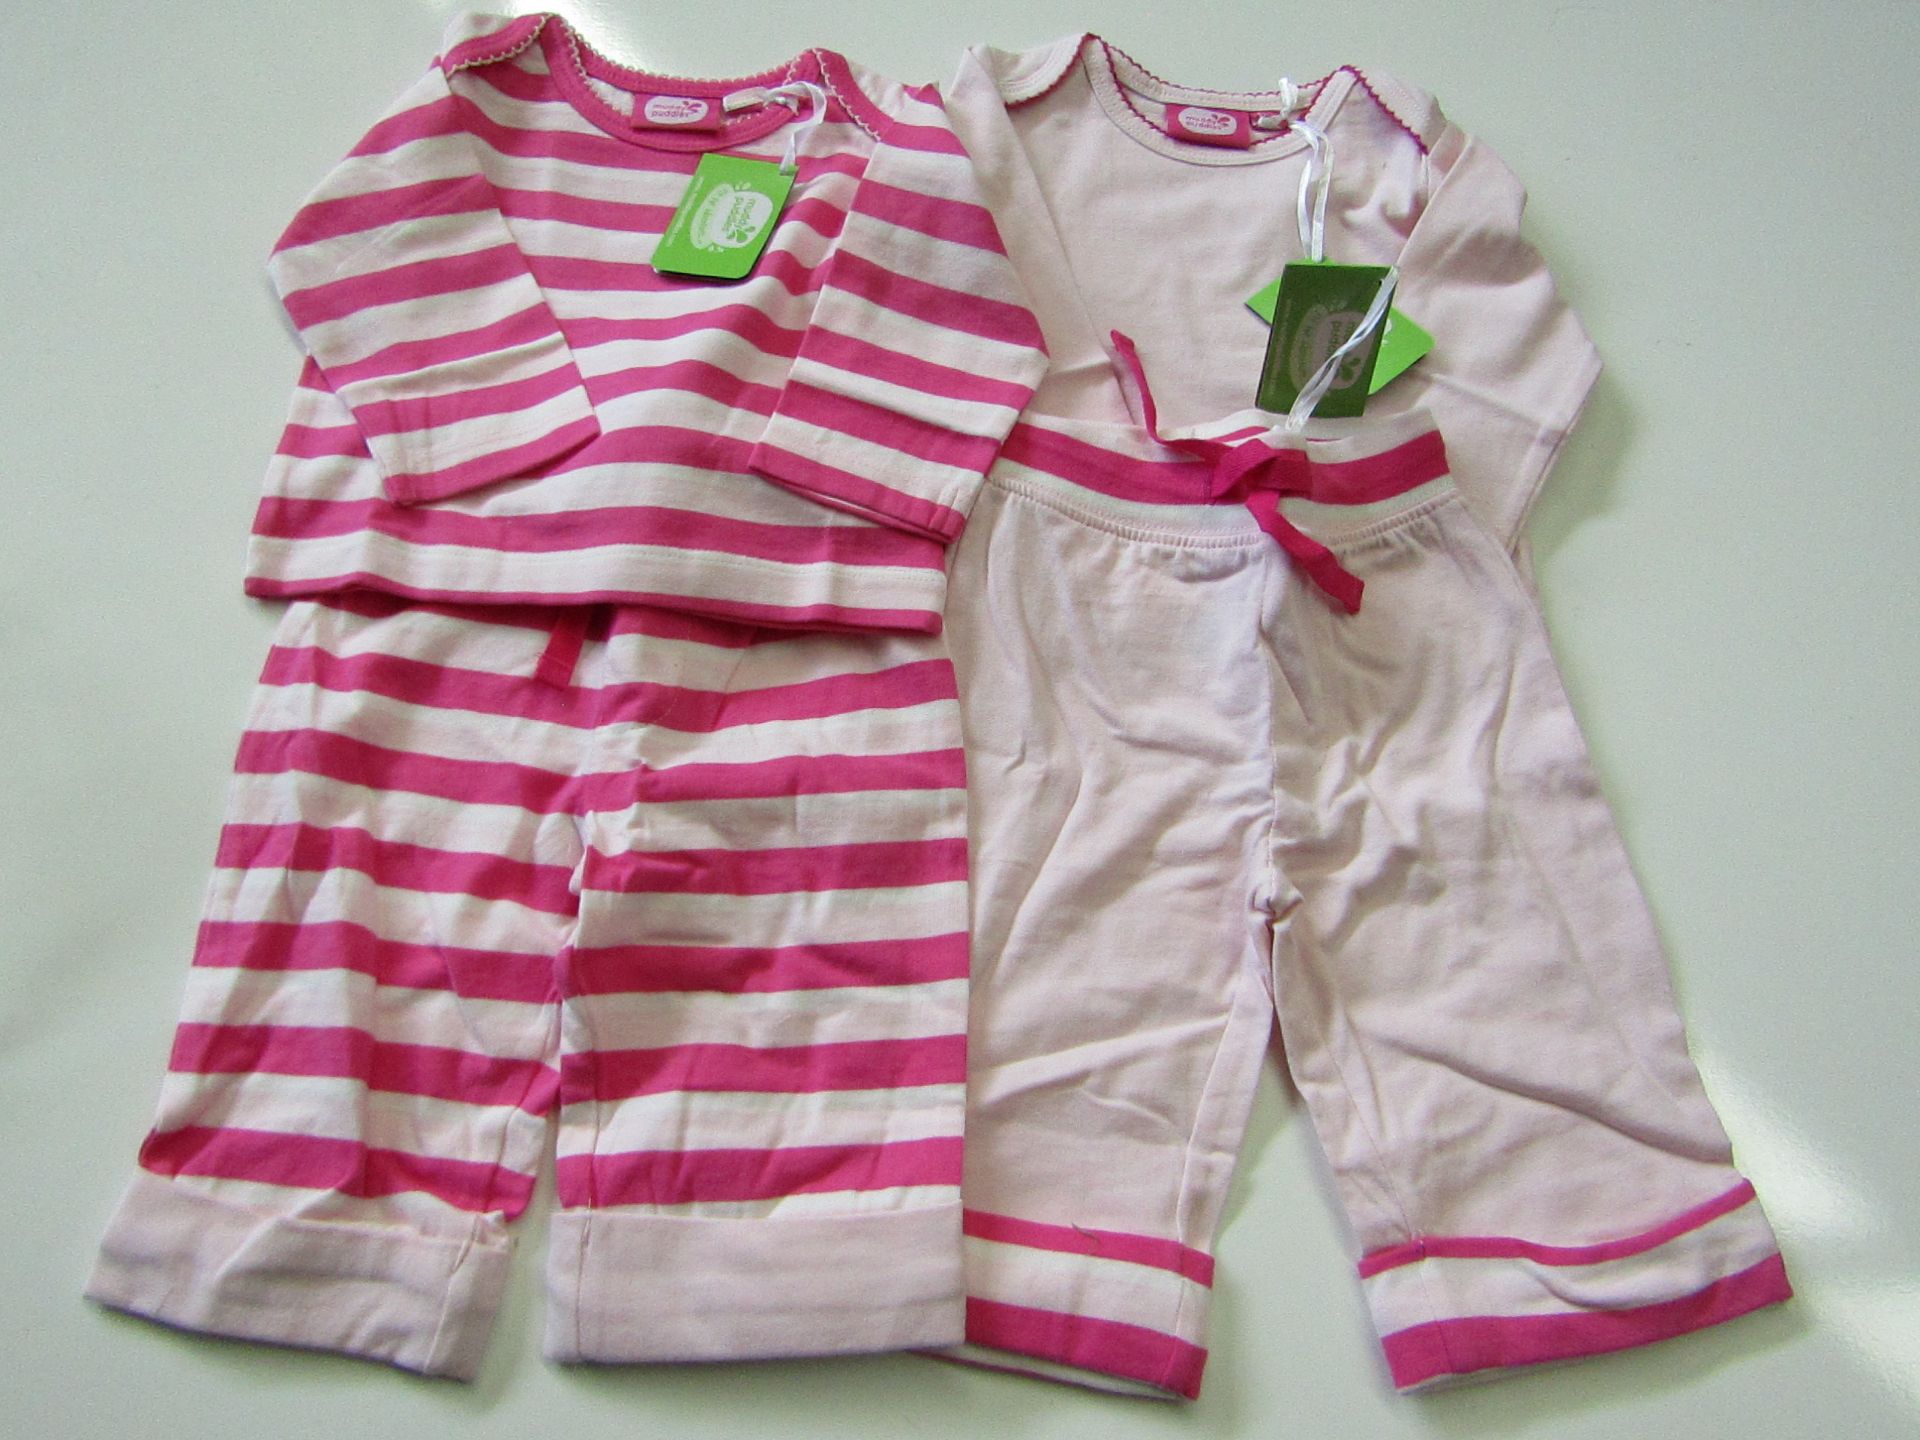 Muddy Puddles 3 X PKS of 2 Baby Tops 1 X Stripped 1 X Plain 3-6 Months Pink New & Packaged